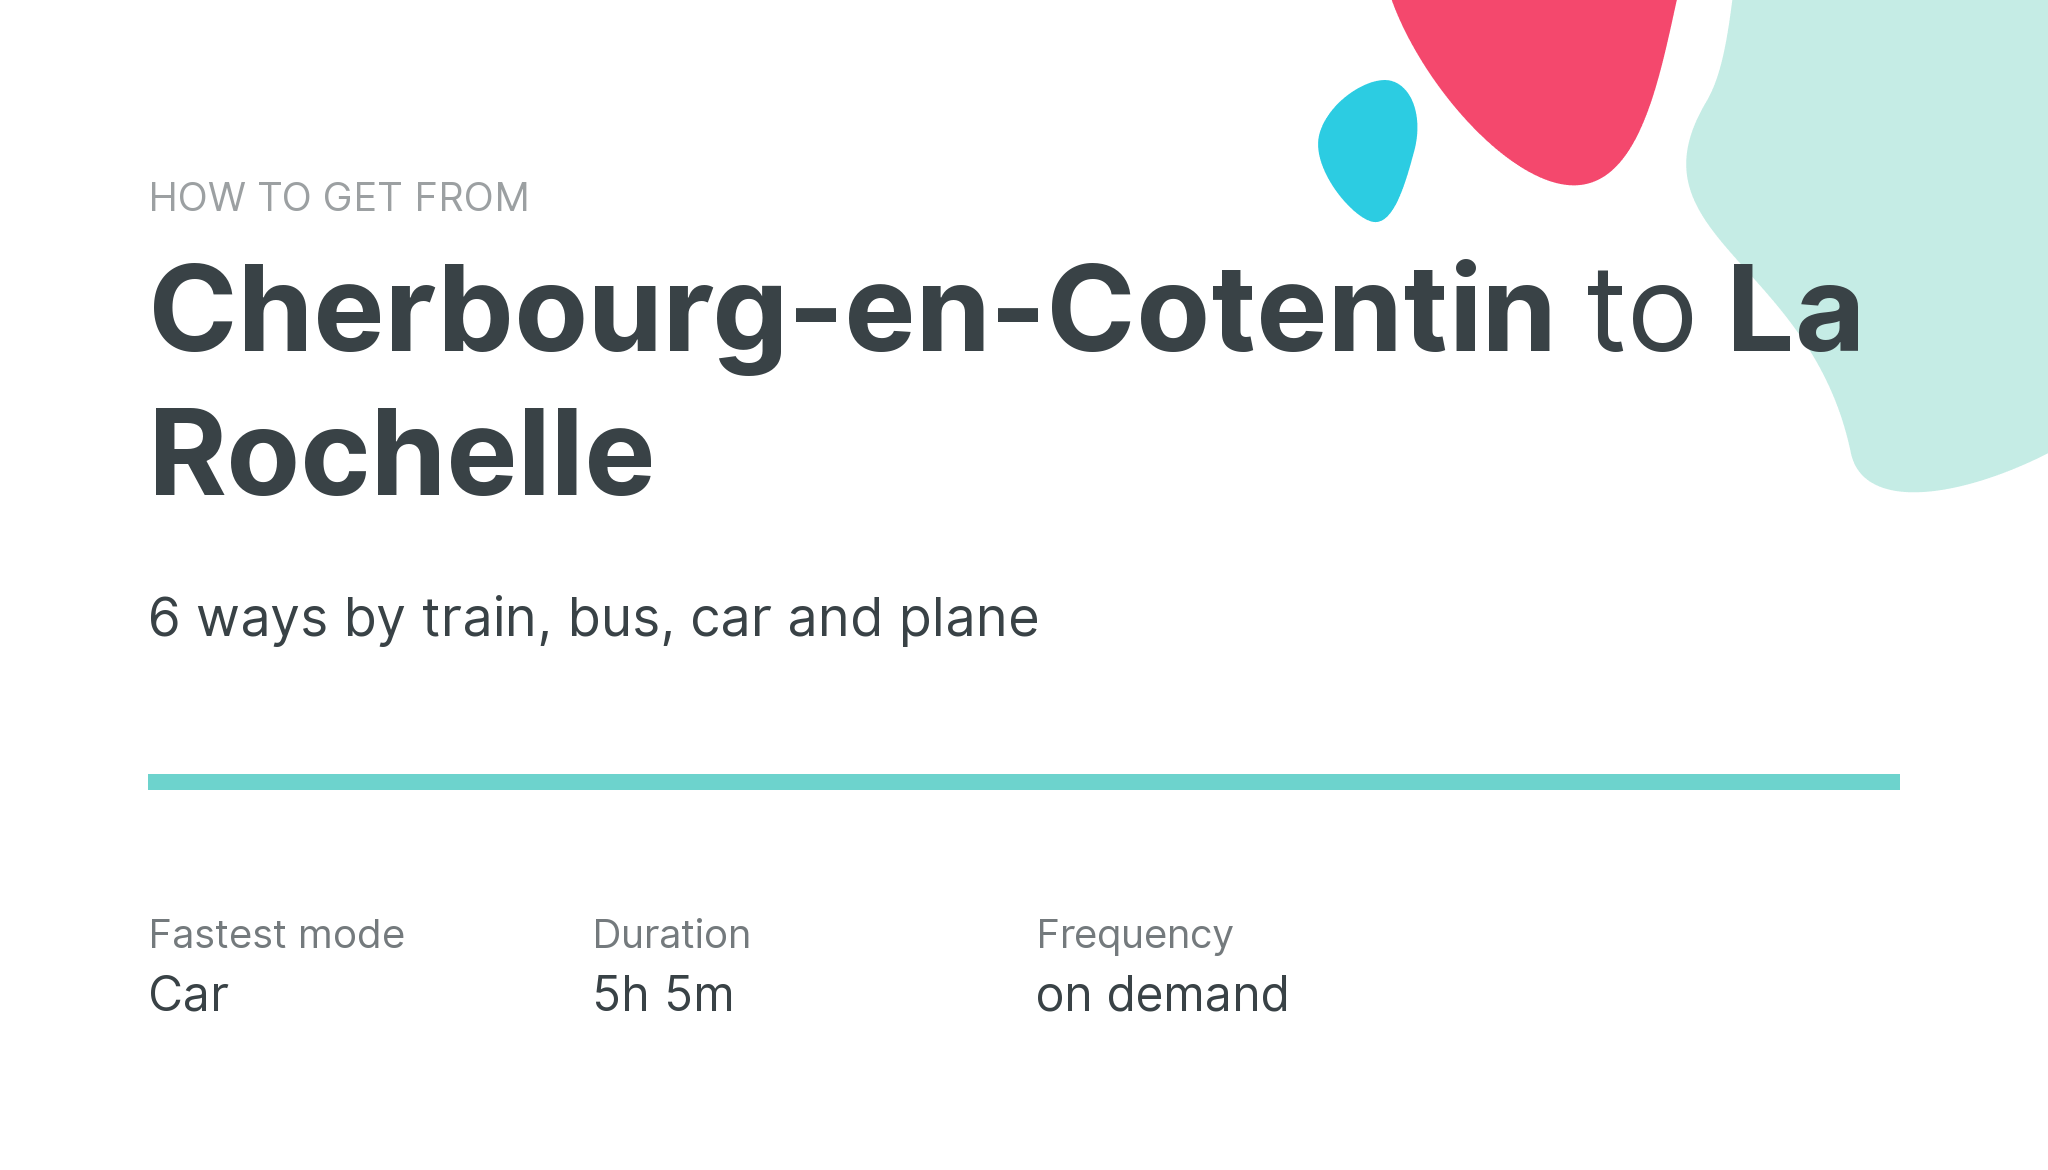 How do I get from Cherbourg-en-Cotentin to La Rochelle